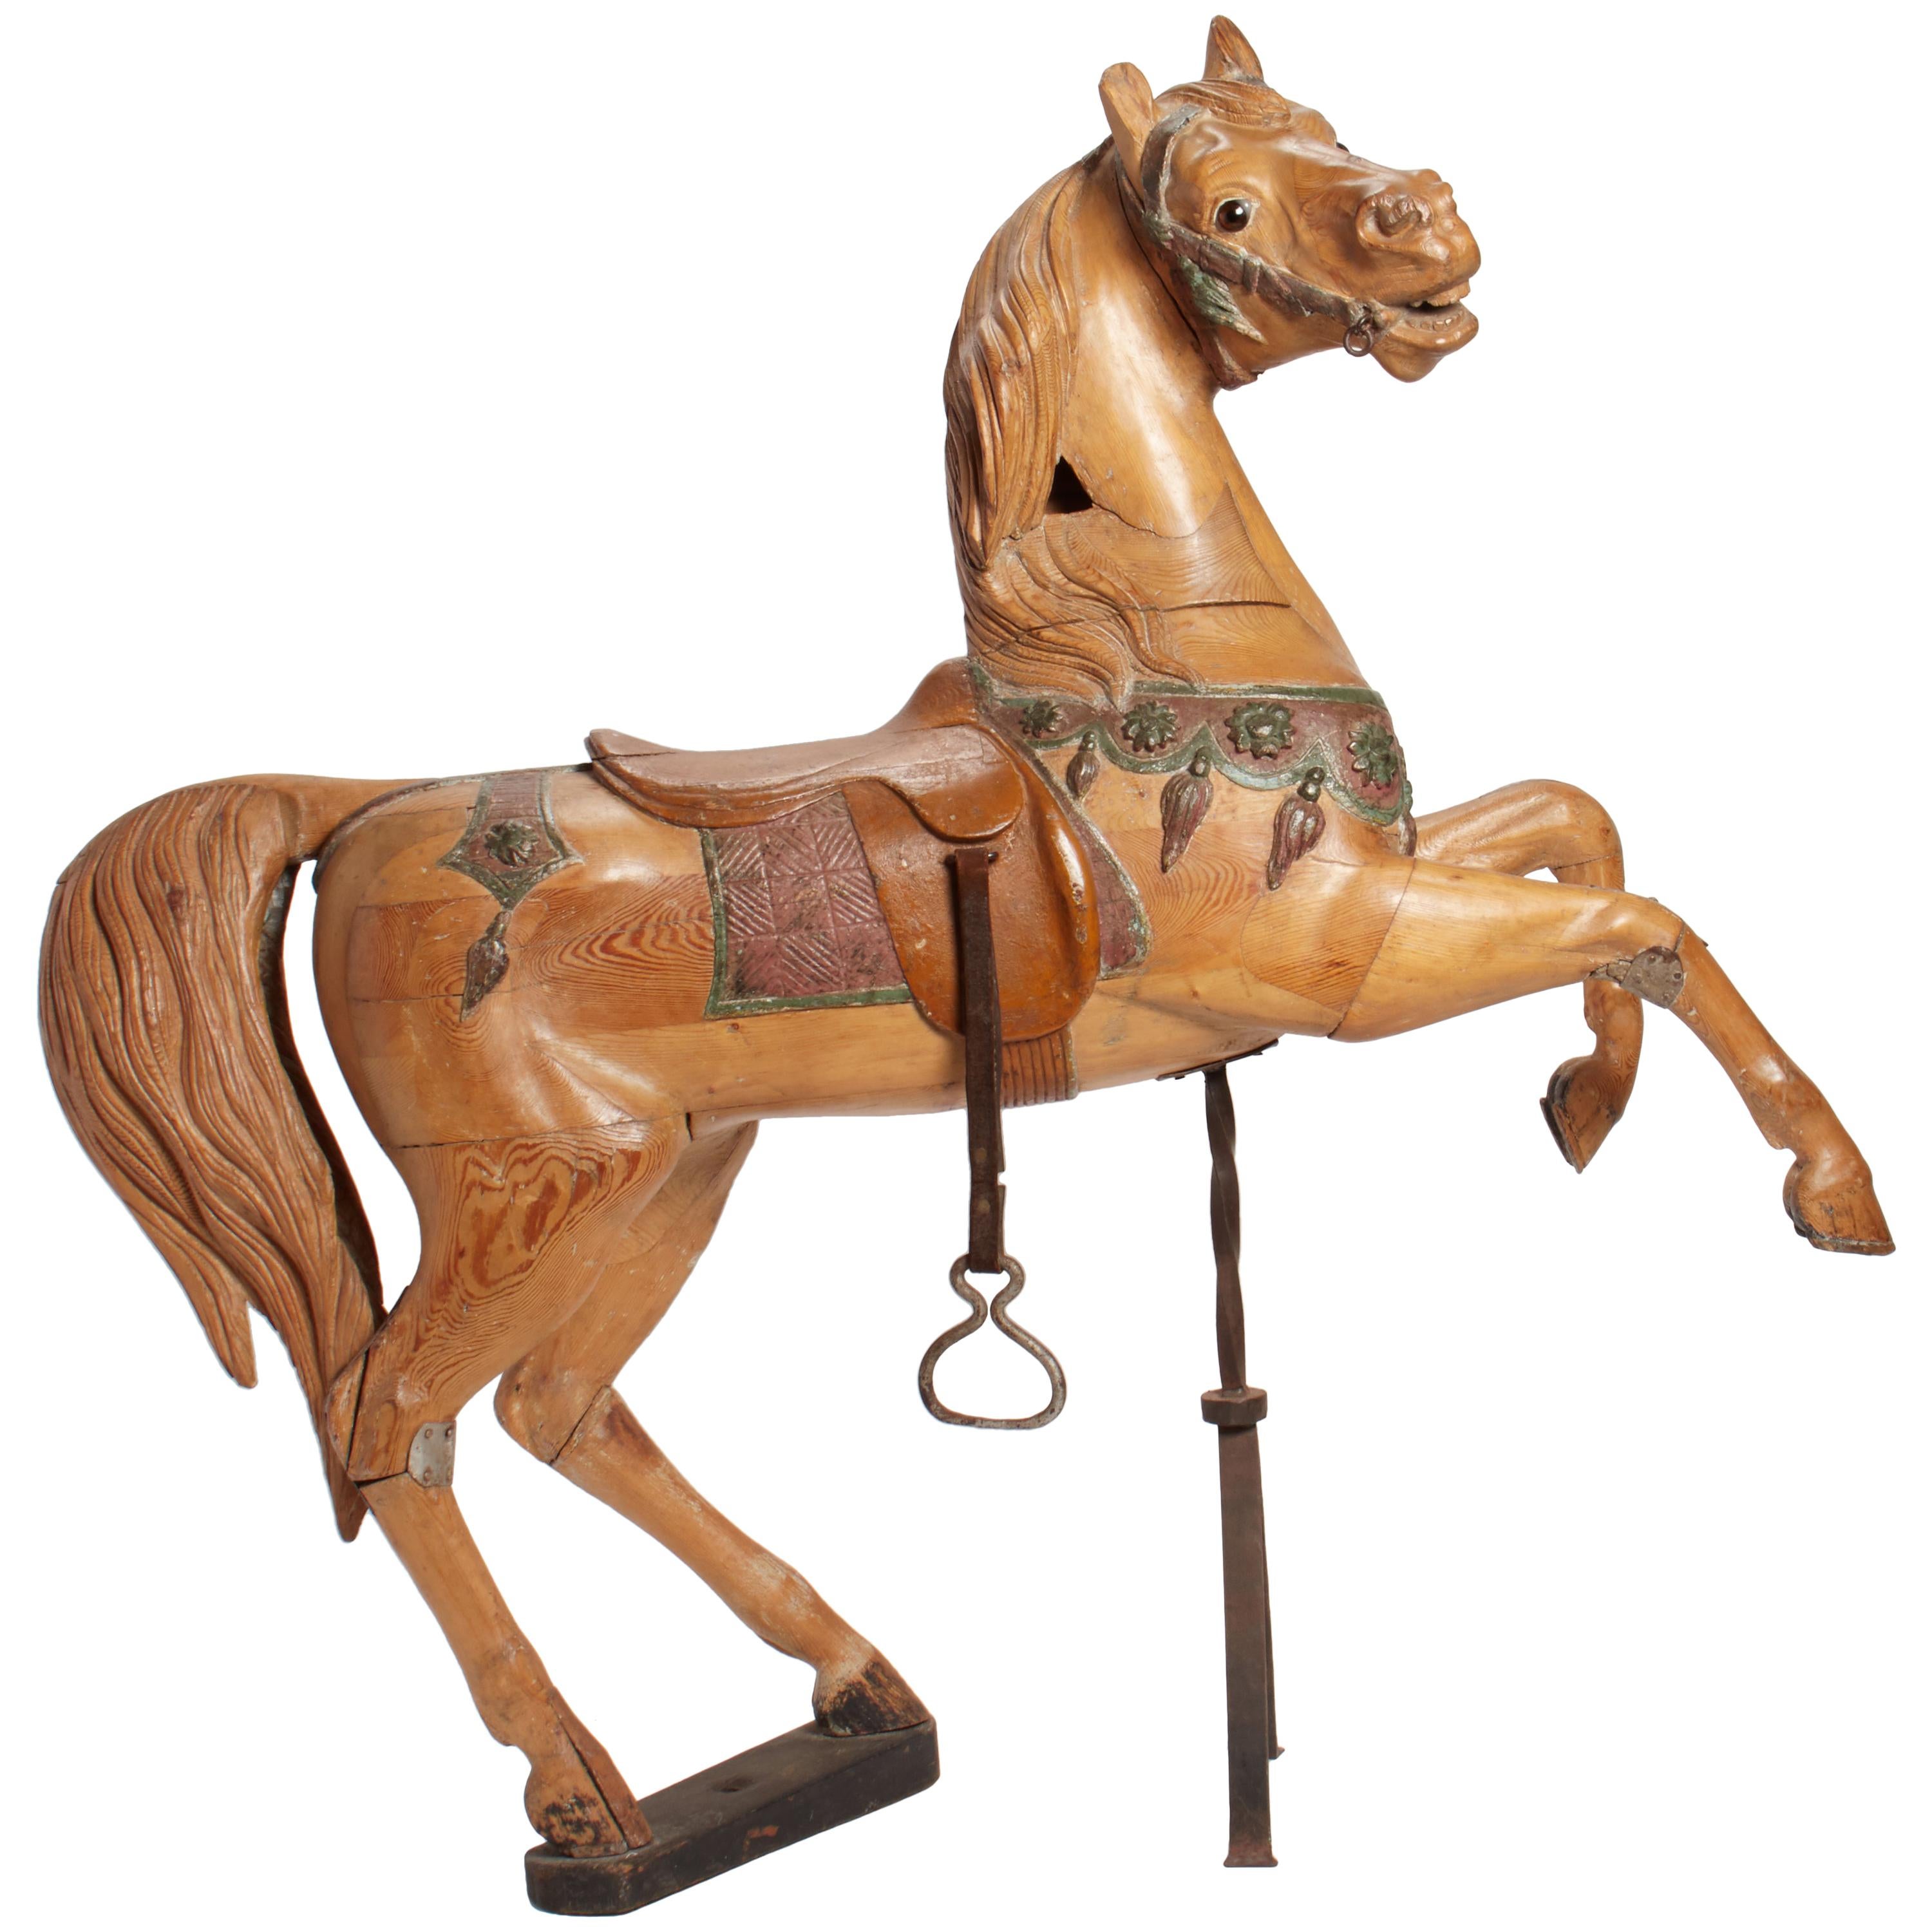 Rampant Carousel Horse, France, End of 19th Century